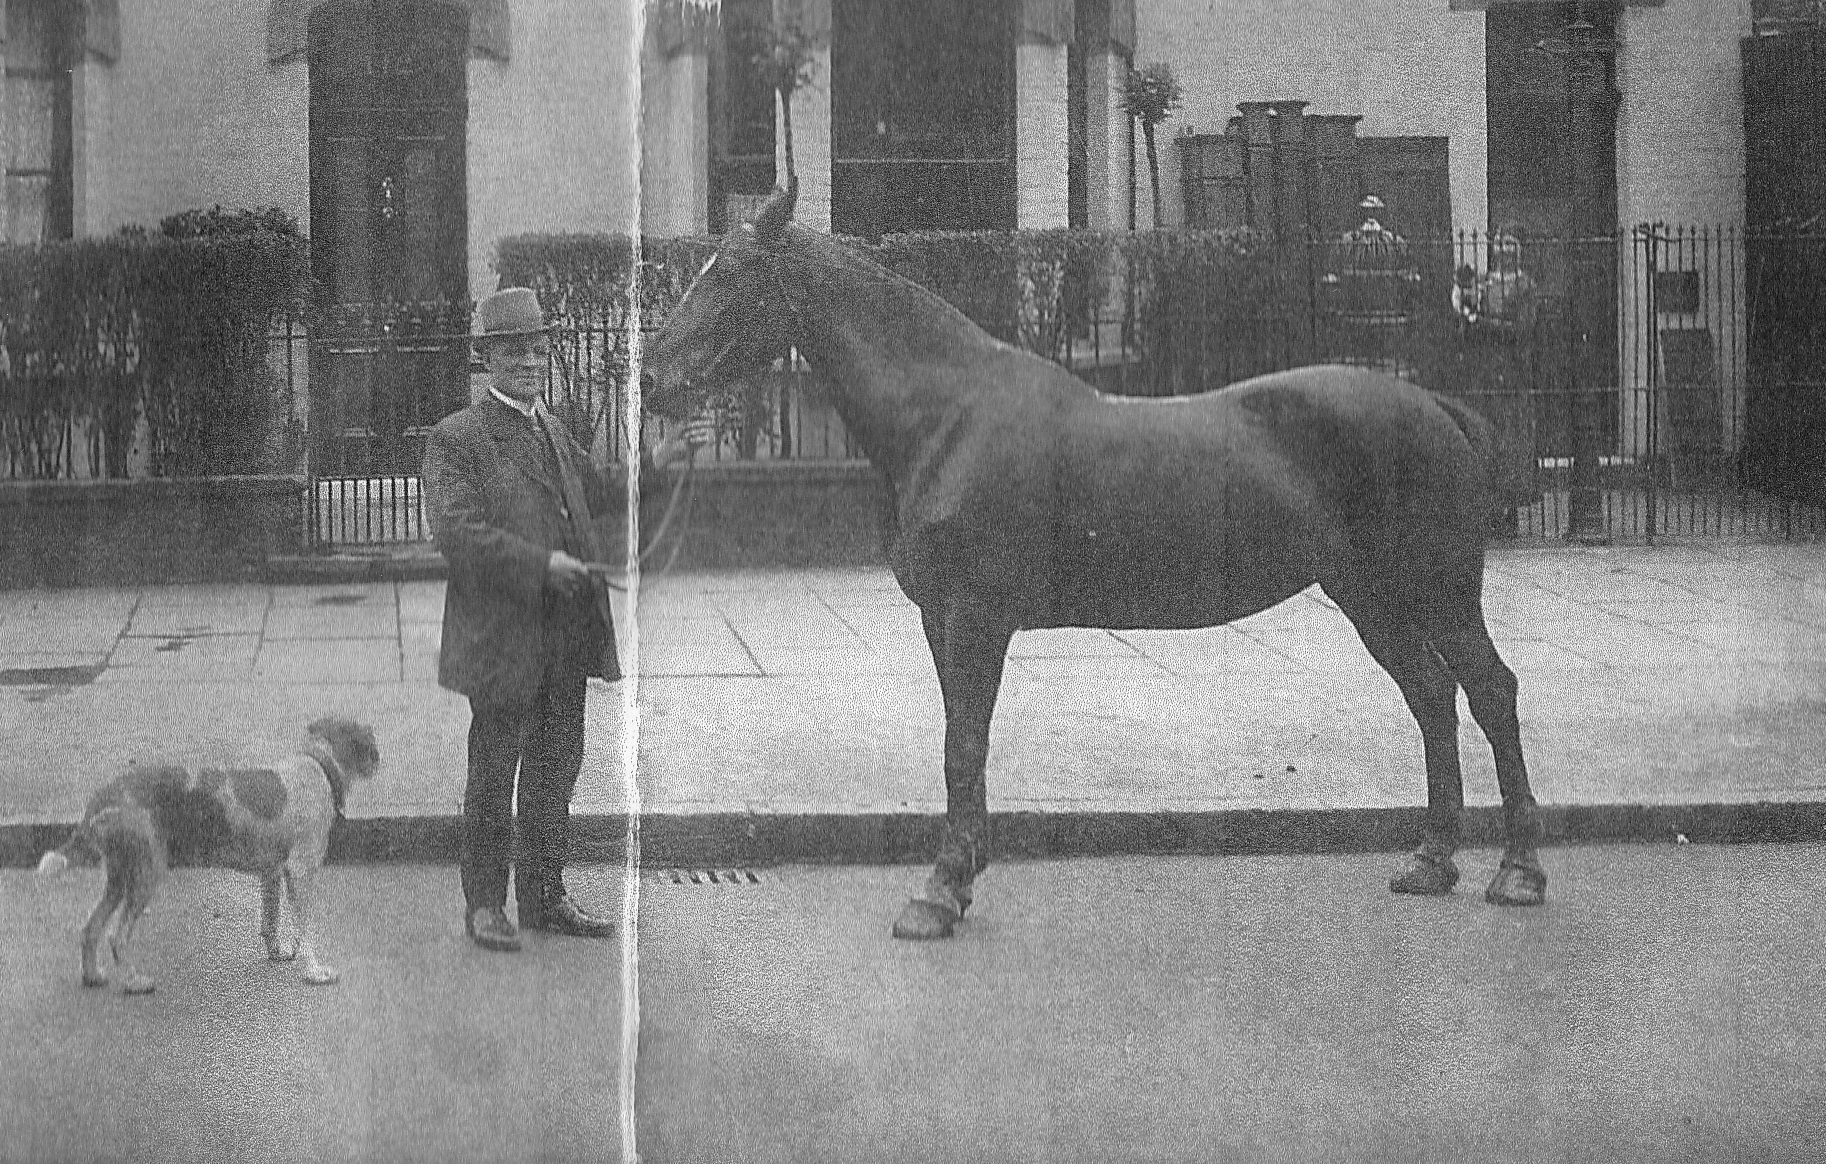 Believed to be horse dealer - George Painter